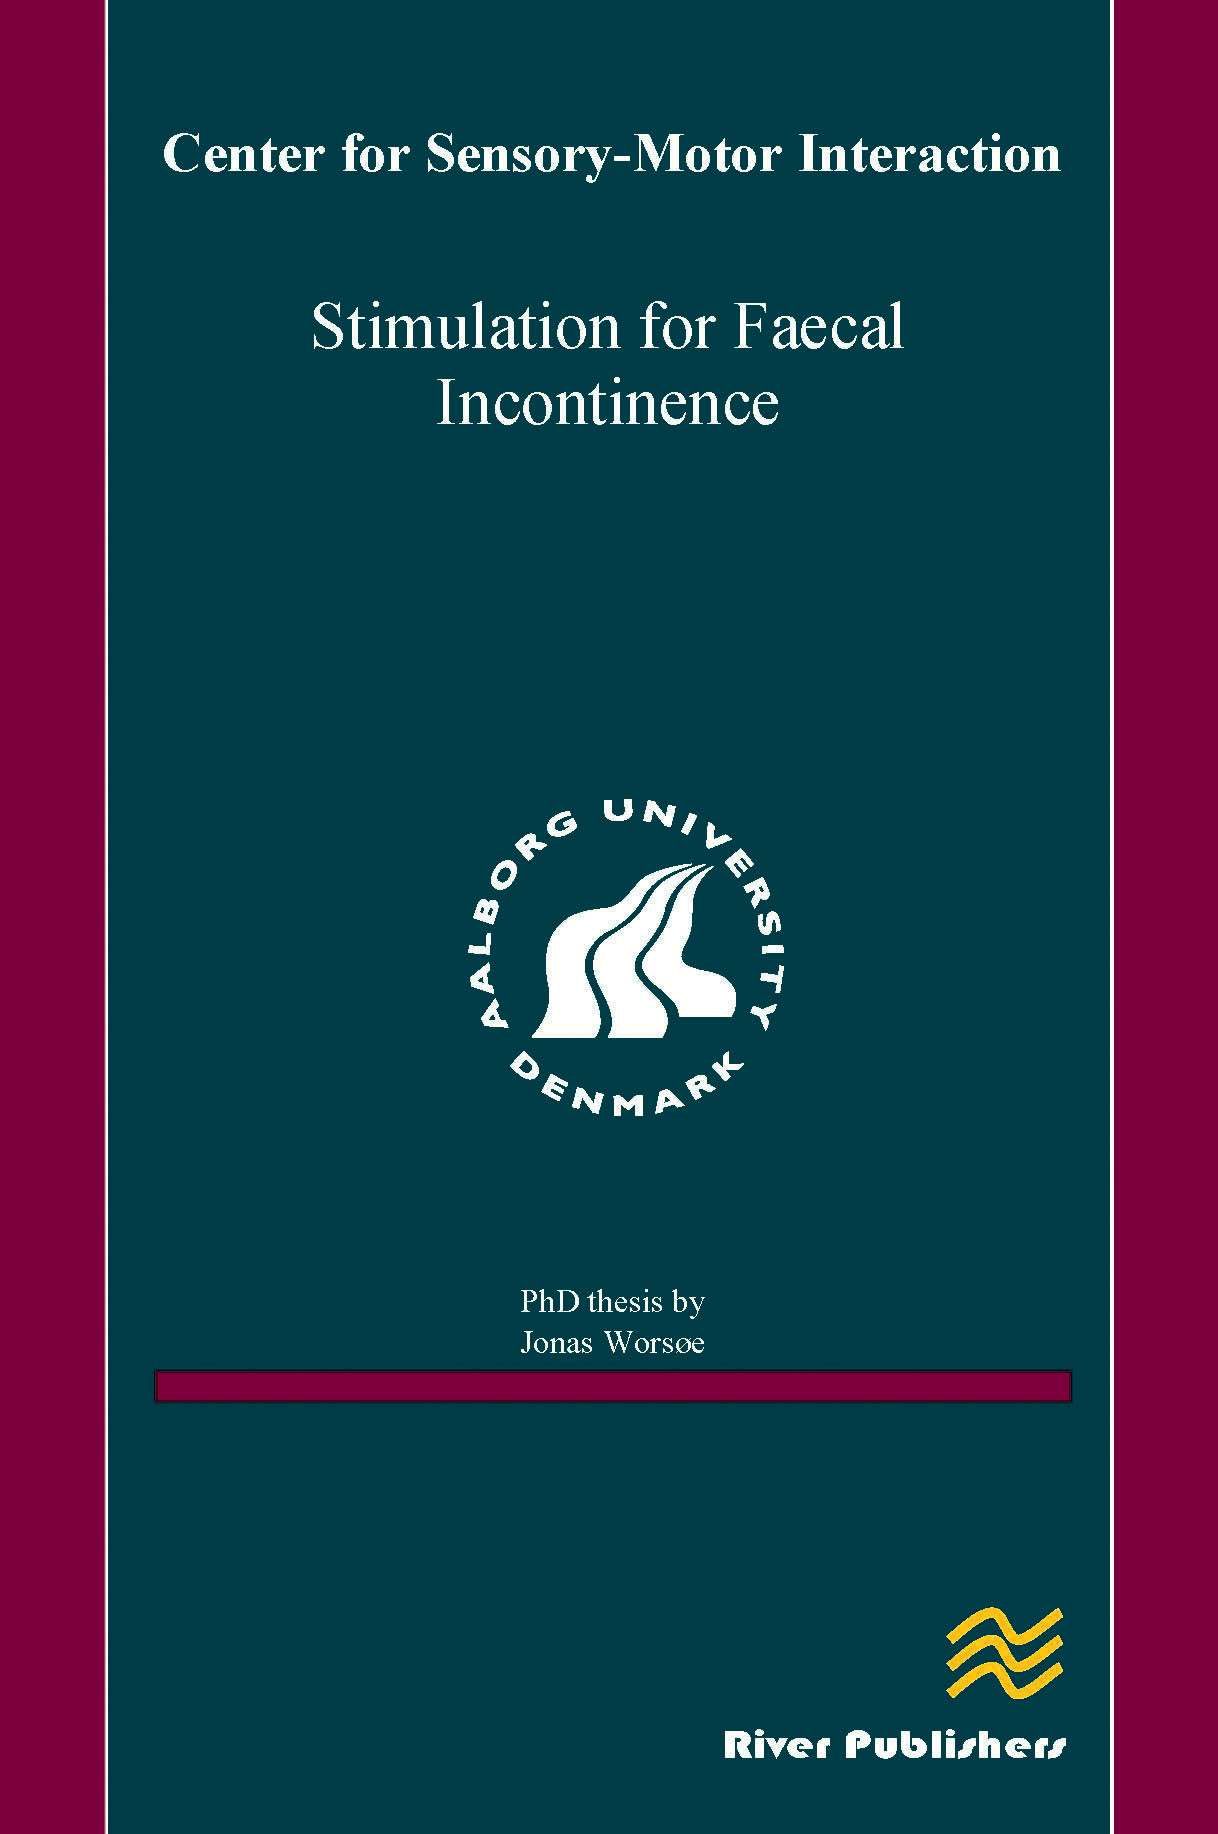 Stimulation for Faecal Incontinence